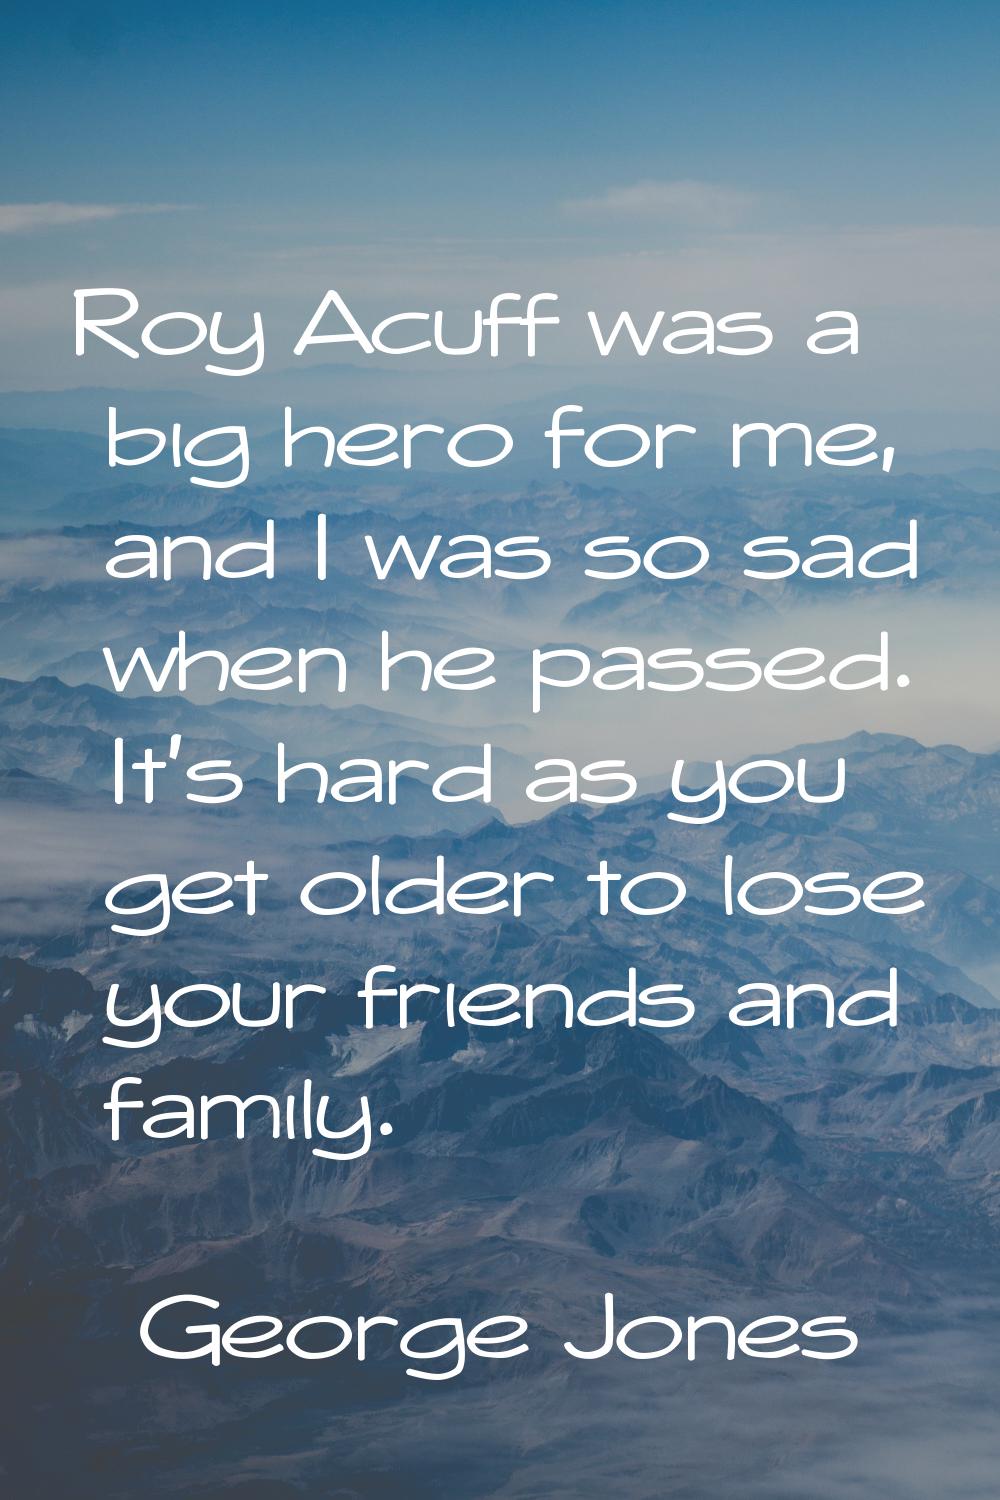 Roy Acuff was a big hero for me, and I was so sad when he passed. It's hard as you get older to los